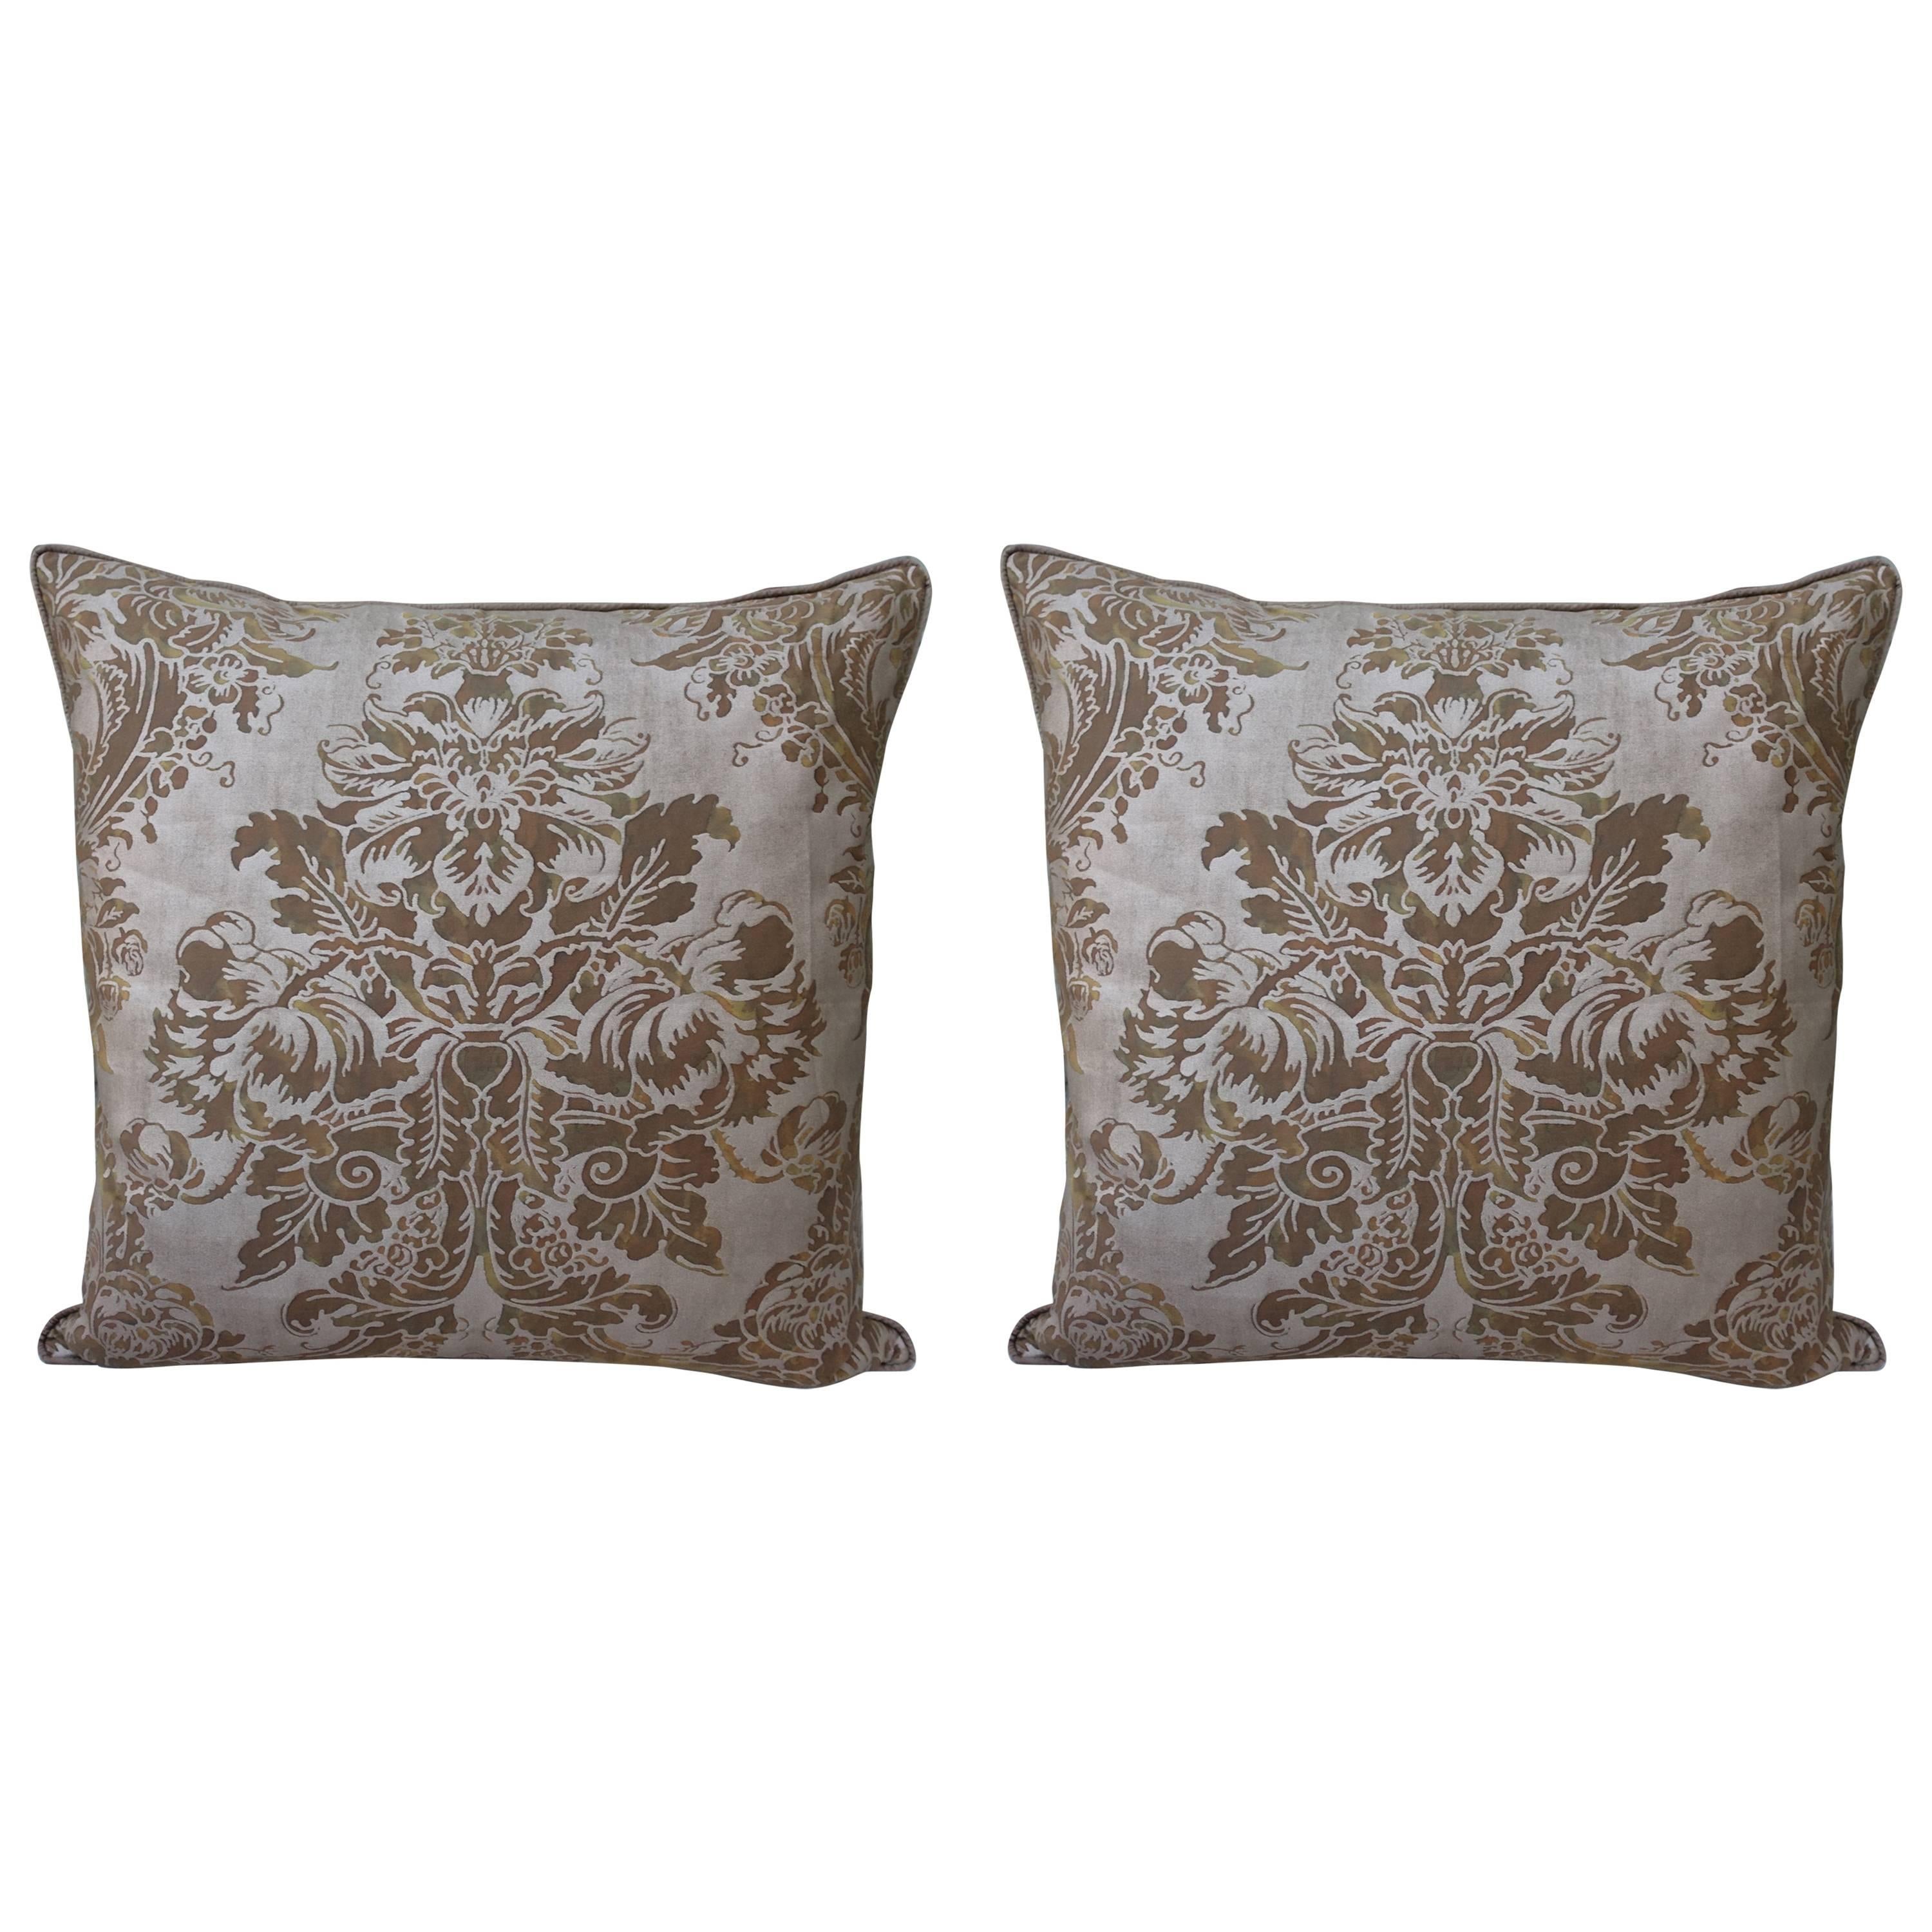 Pair of Dandola Patterned Fortuny Pillows